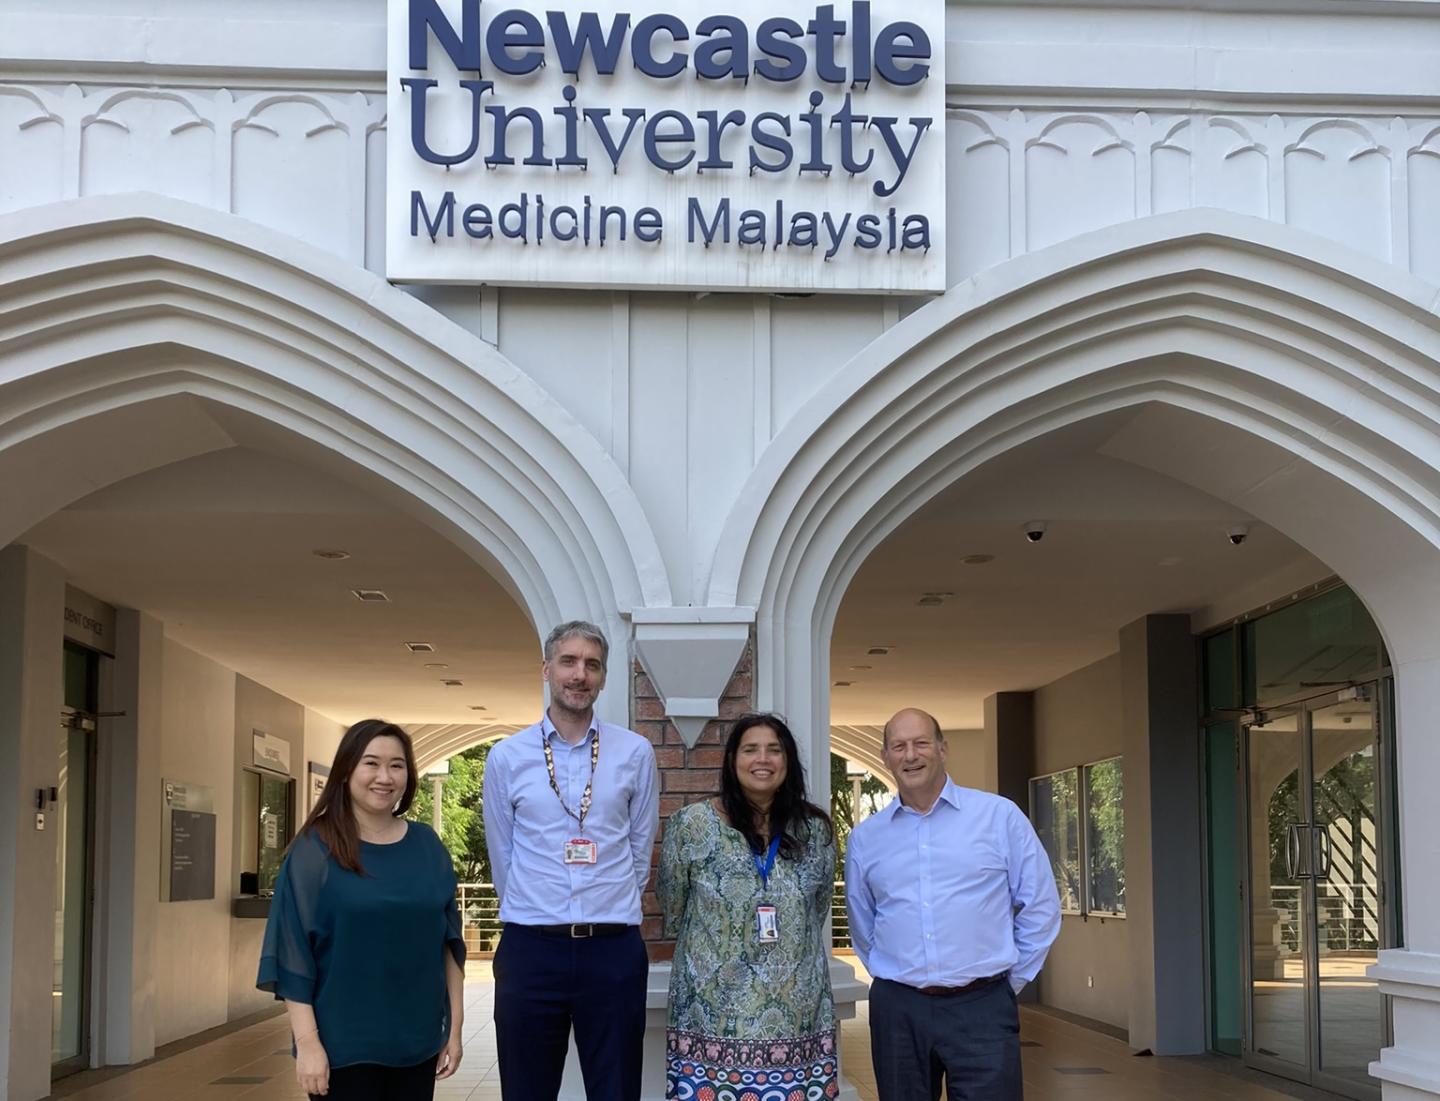 Four people in front of a grand entrance with a sign saying Newcastle University Medicine Malaysia